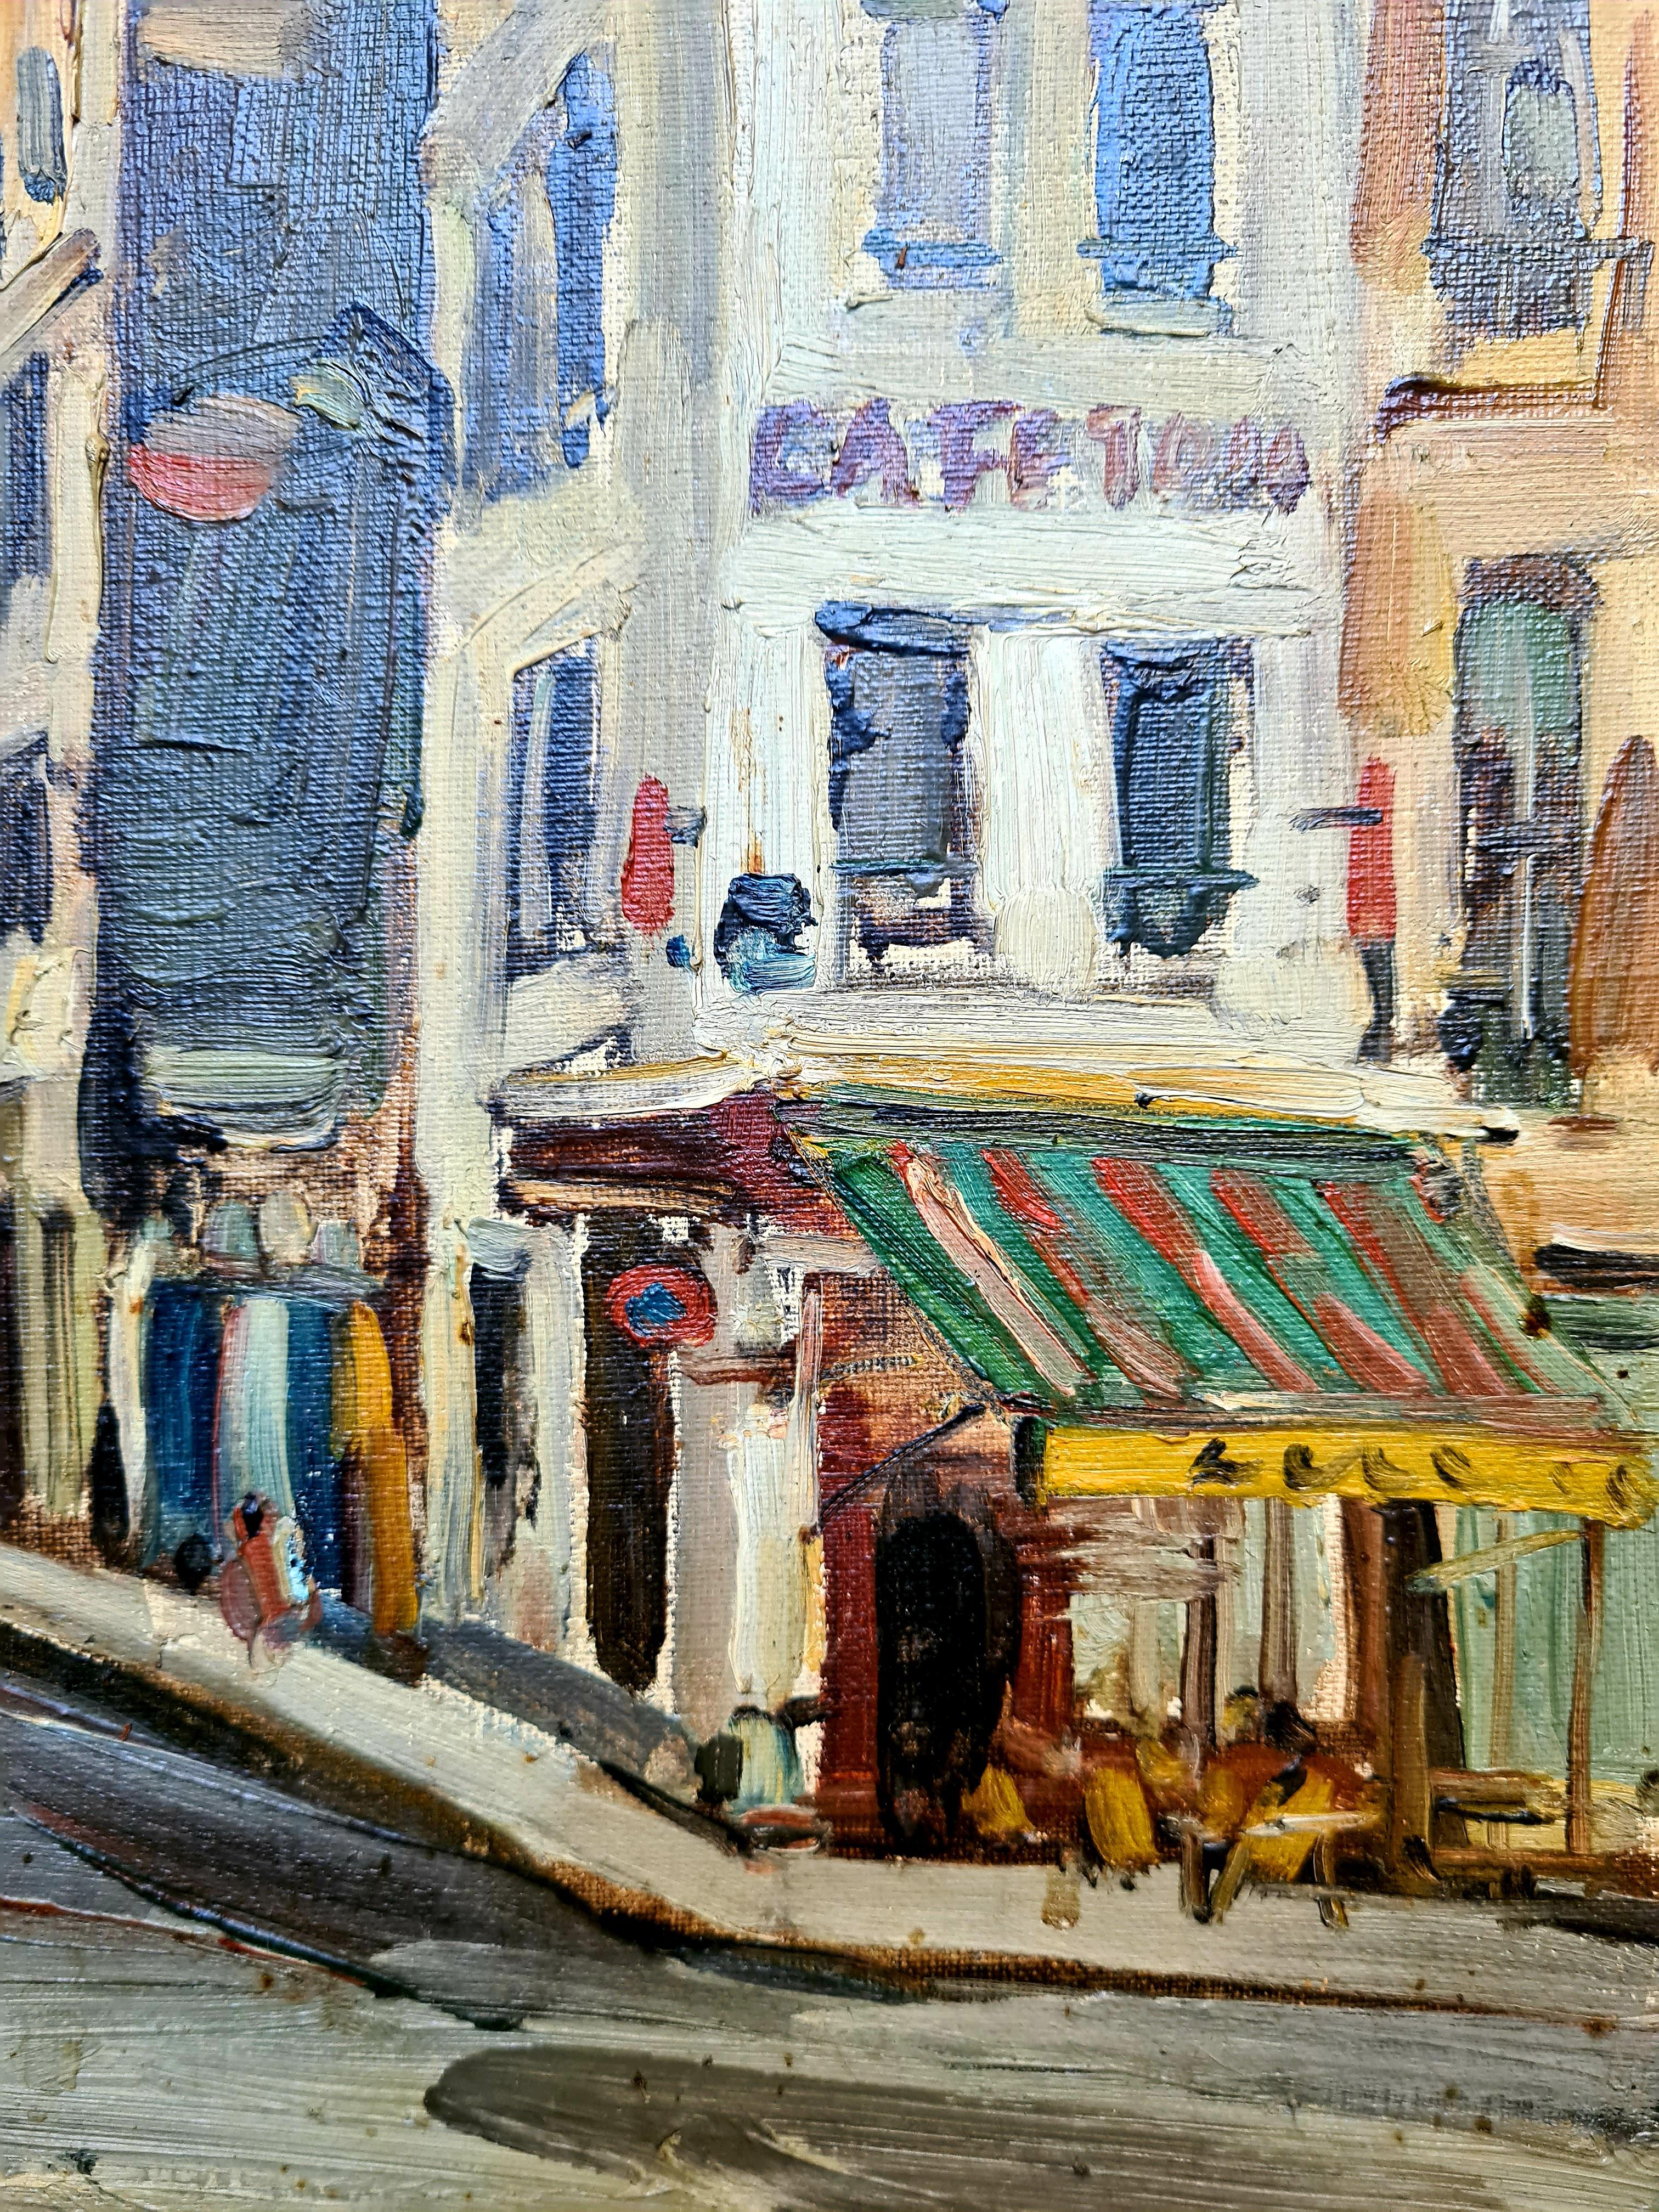 1960s oil on canvas view of the streets around Montparnasse, Paris by Osamu Komma 近馬 治. The painting is signed and dated bottom left and there is script to the back of the canvas. ミッドセンチュリーパリの油絵

A charming and atmospheric painting of the iconic